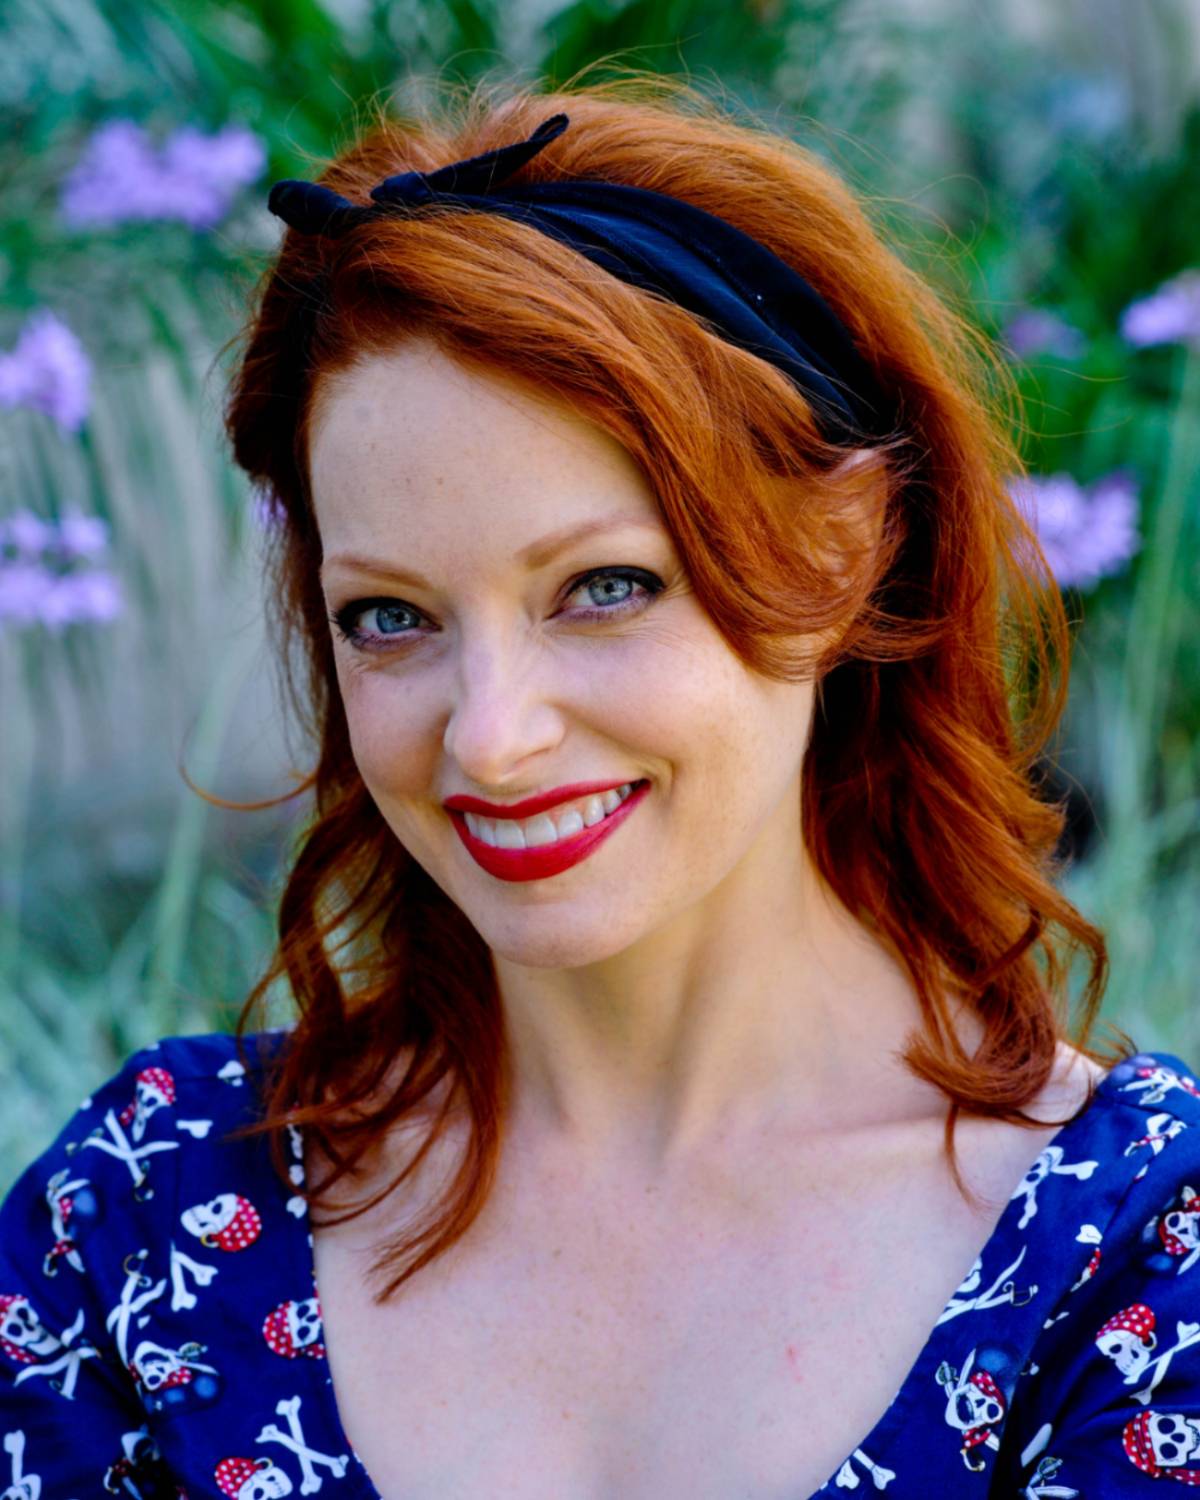 Elizabeth is a caucasian woman with red hair and blue eyes. She is wearing a blue top and is smiling widely at the camera.